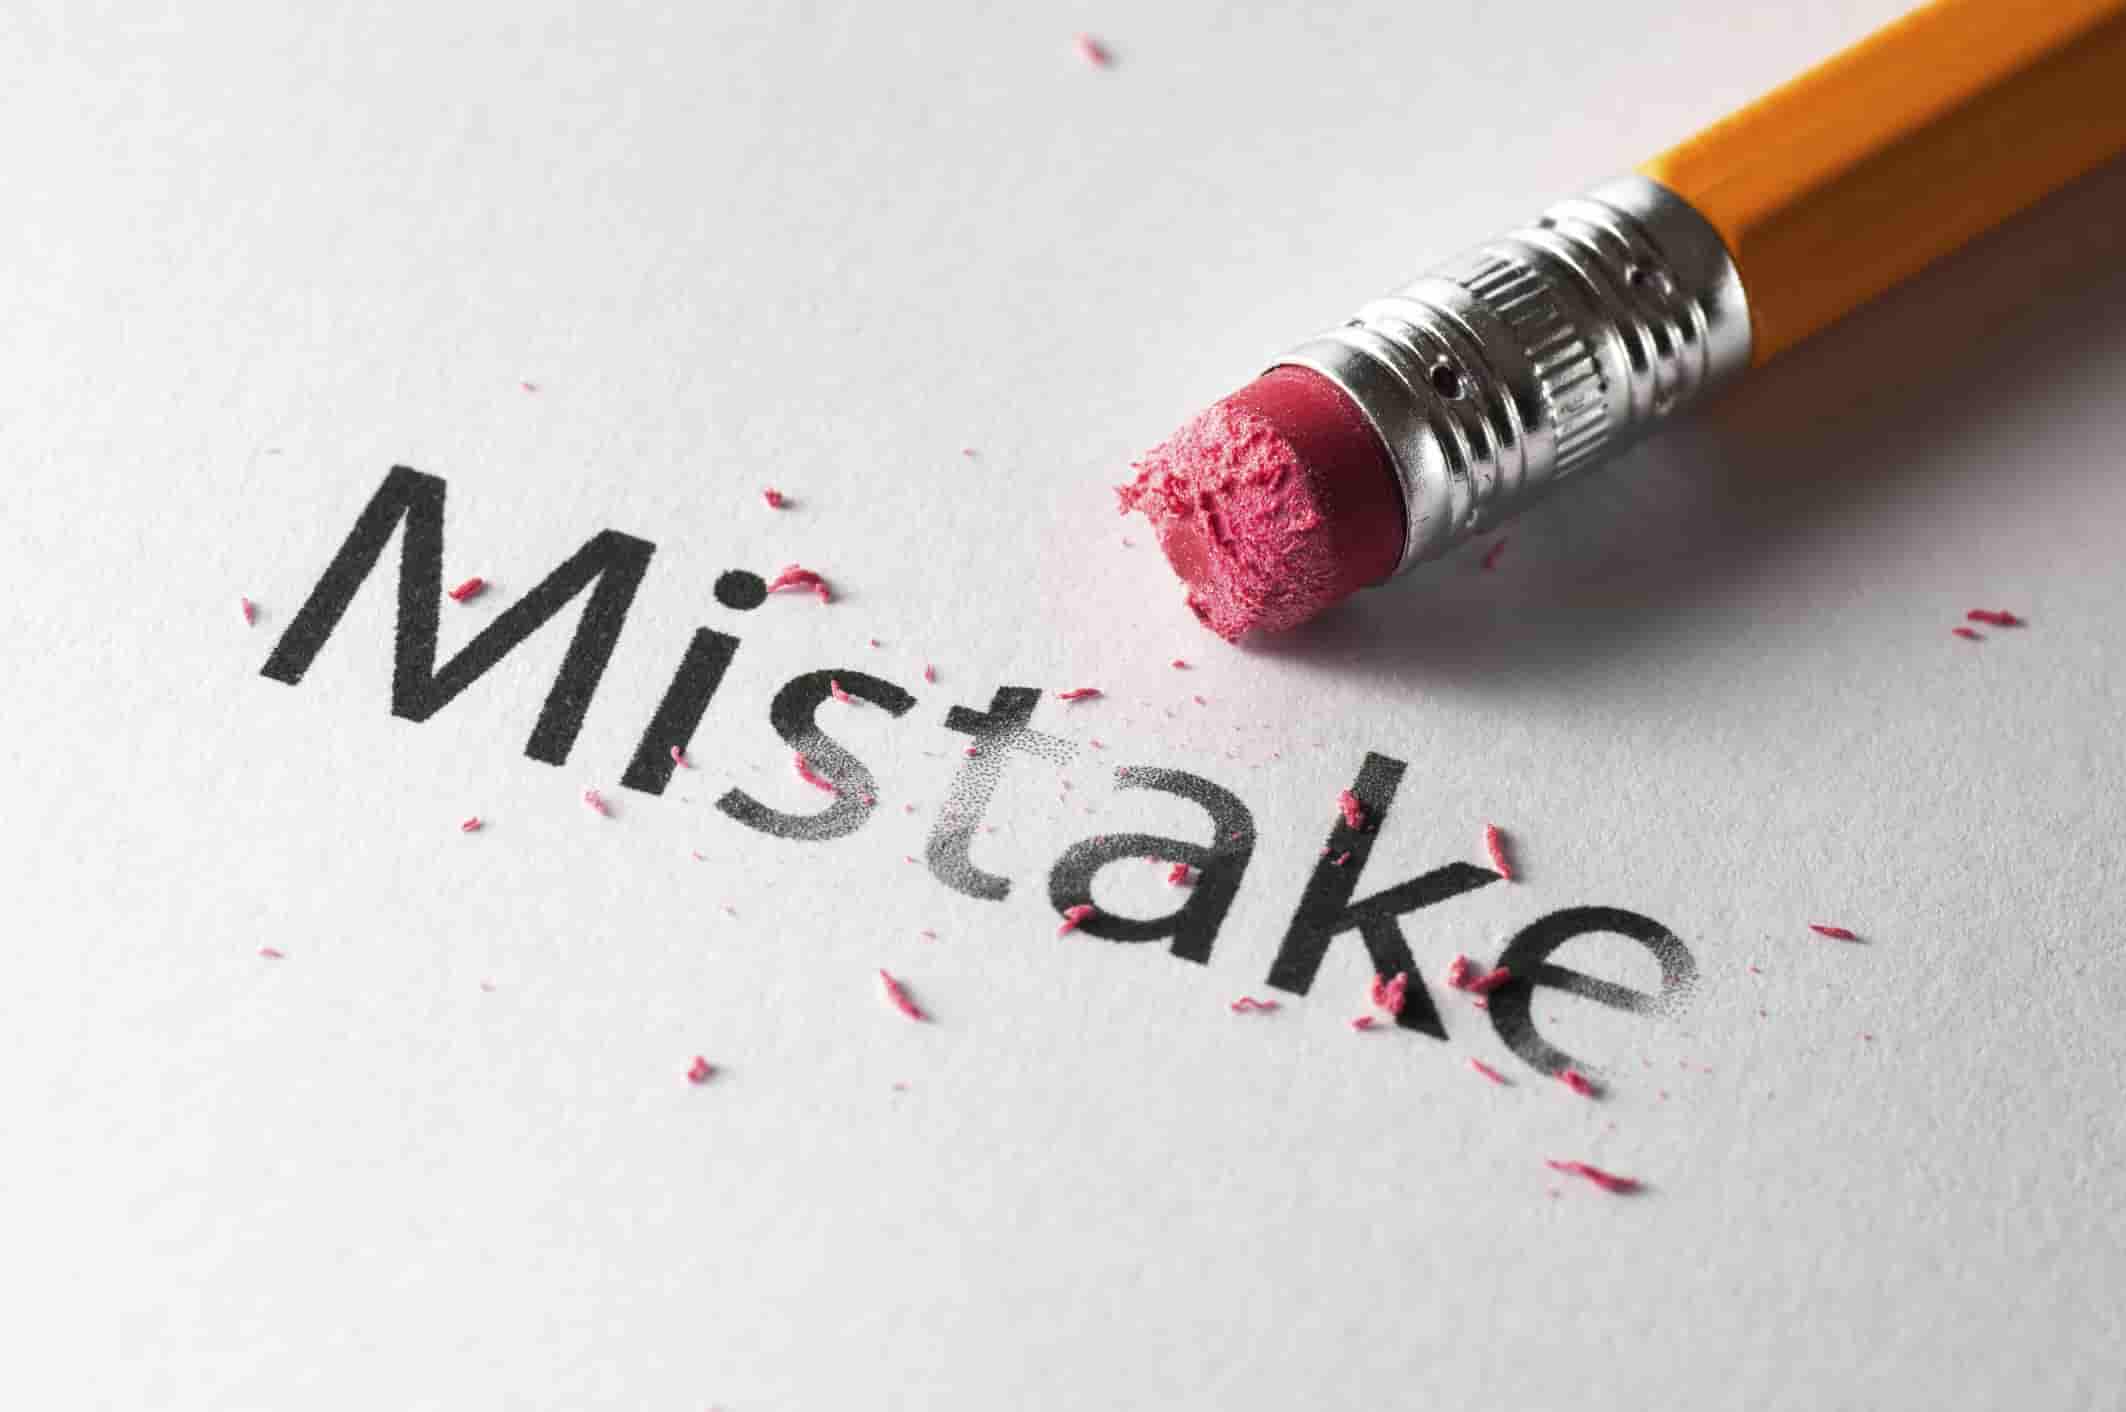 10. Clean up any mistakes - wide 1